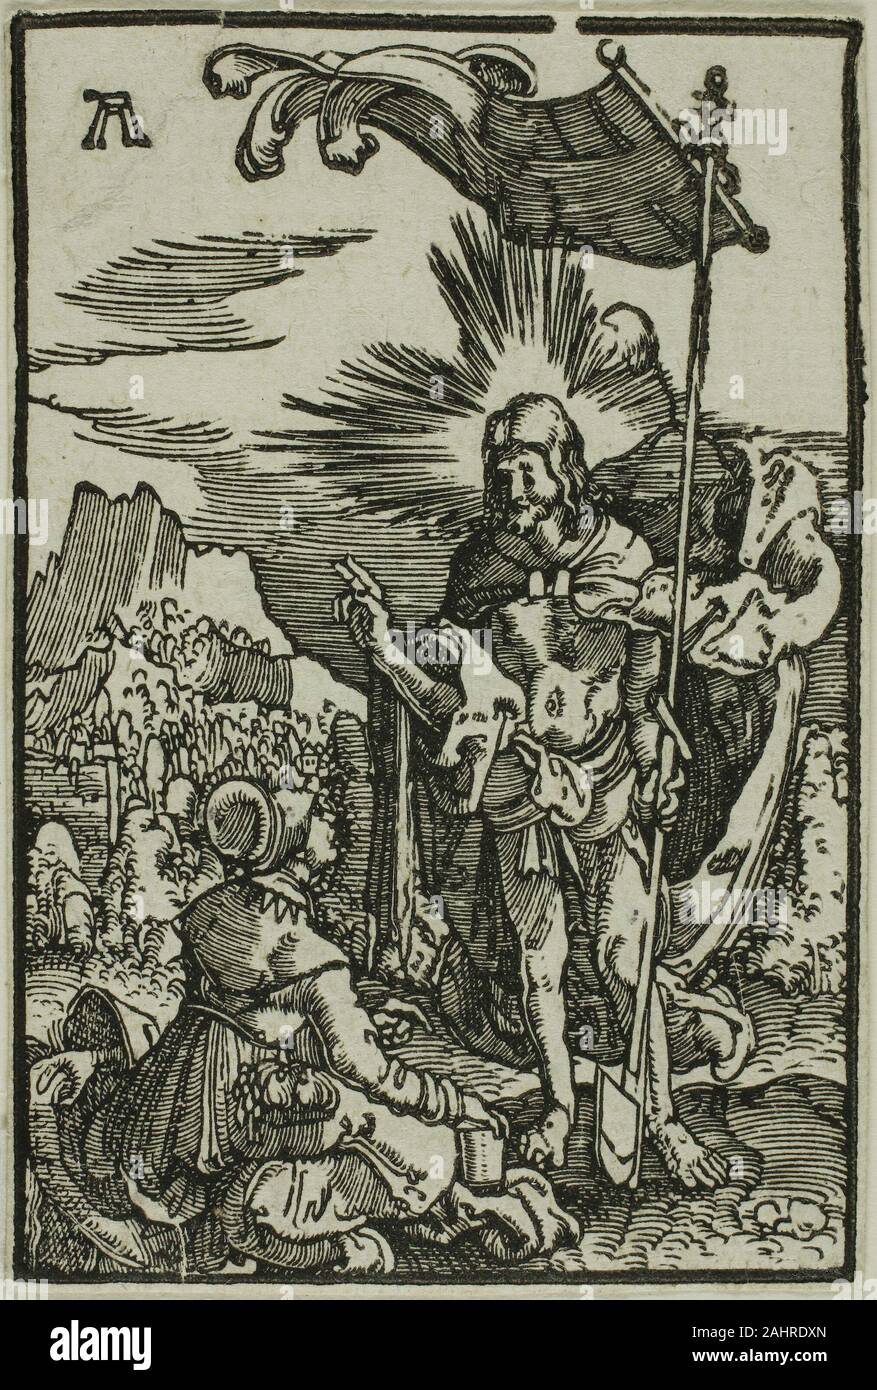 Albrecht Altdorfer. Christ Appears to the Magdalen, from The Fall and Redemption of Man. 1500–1538. Germany. Woodcut in black on ivory laid paper Albrecht Altdorfer, known as one of the Little Masters (in German, Kleinmeister) along with Georg Pencz and the brothers Barthel and Sebald Beham, excelled at creating prints on a minute scale, whether in intaglio or relief. This woodcuts is part of a series entitled The Fall and Redemption of Man contrasting the expulsion of Adam and Eve from paradise with Christ’s Passion narrative. Connoisseurs would have collected these diminutive prints as an en Stock Photo